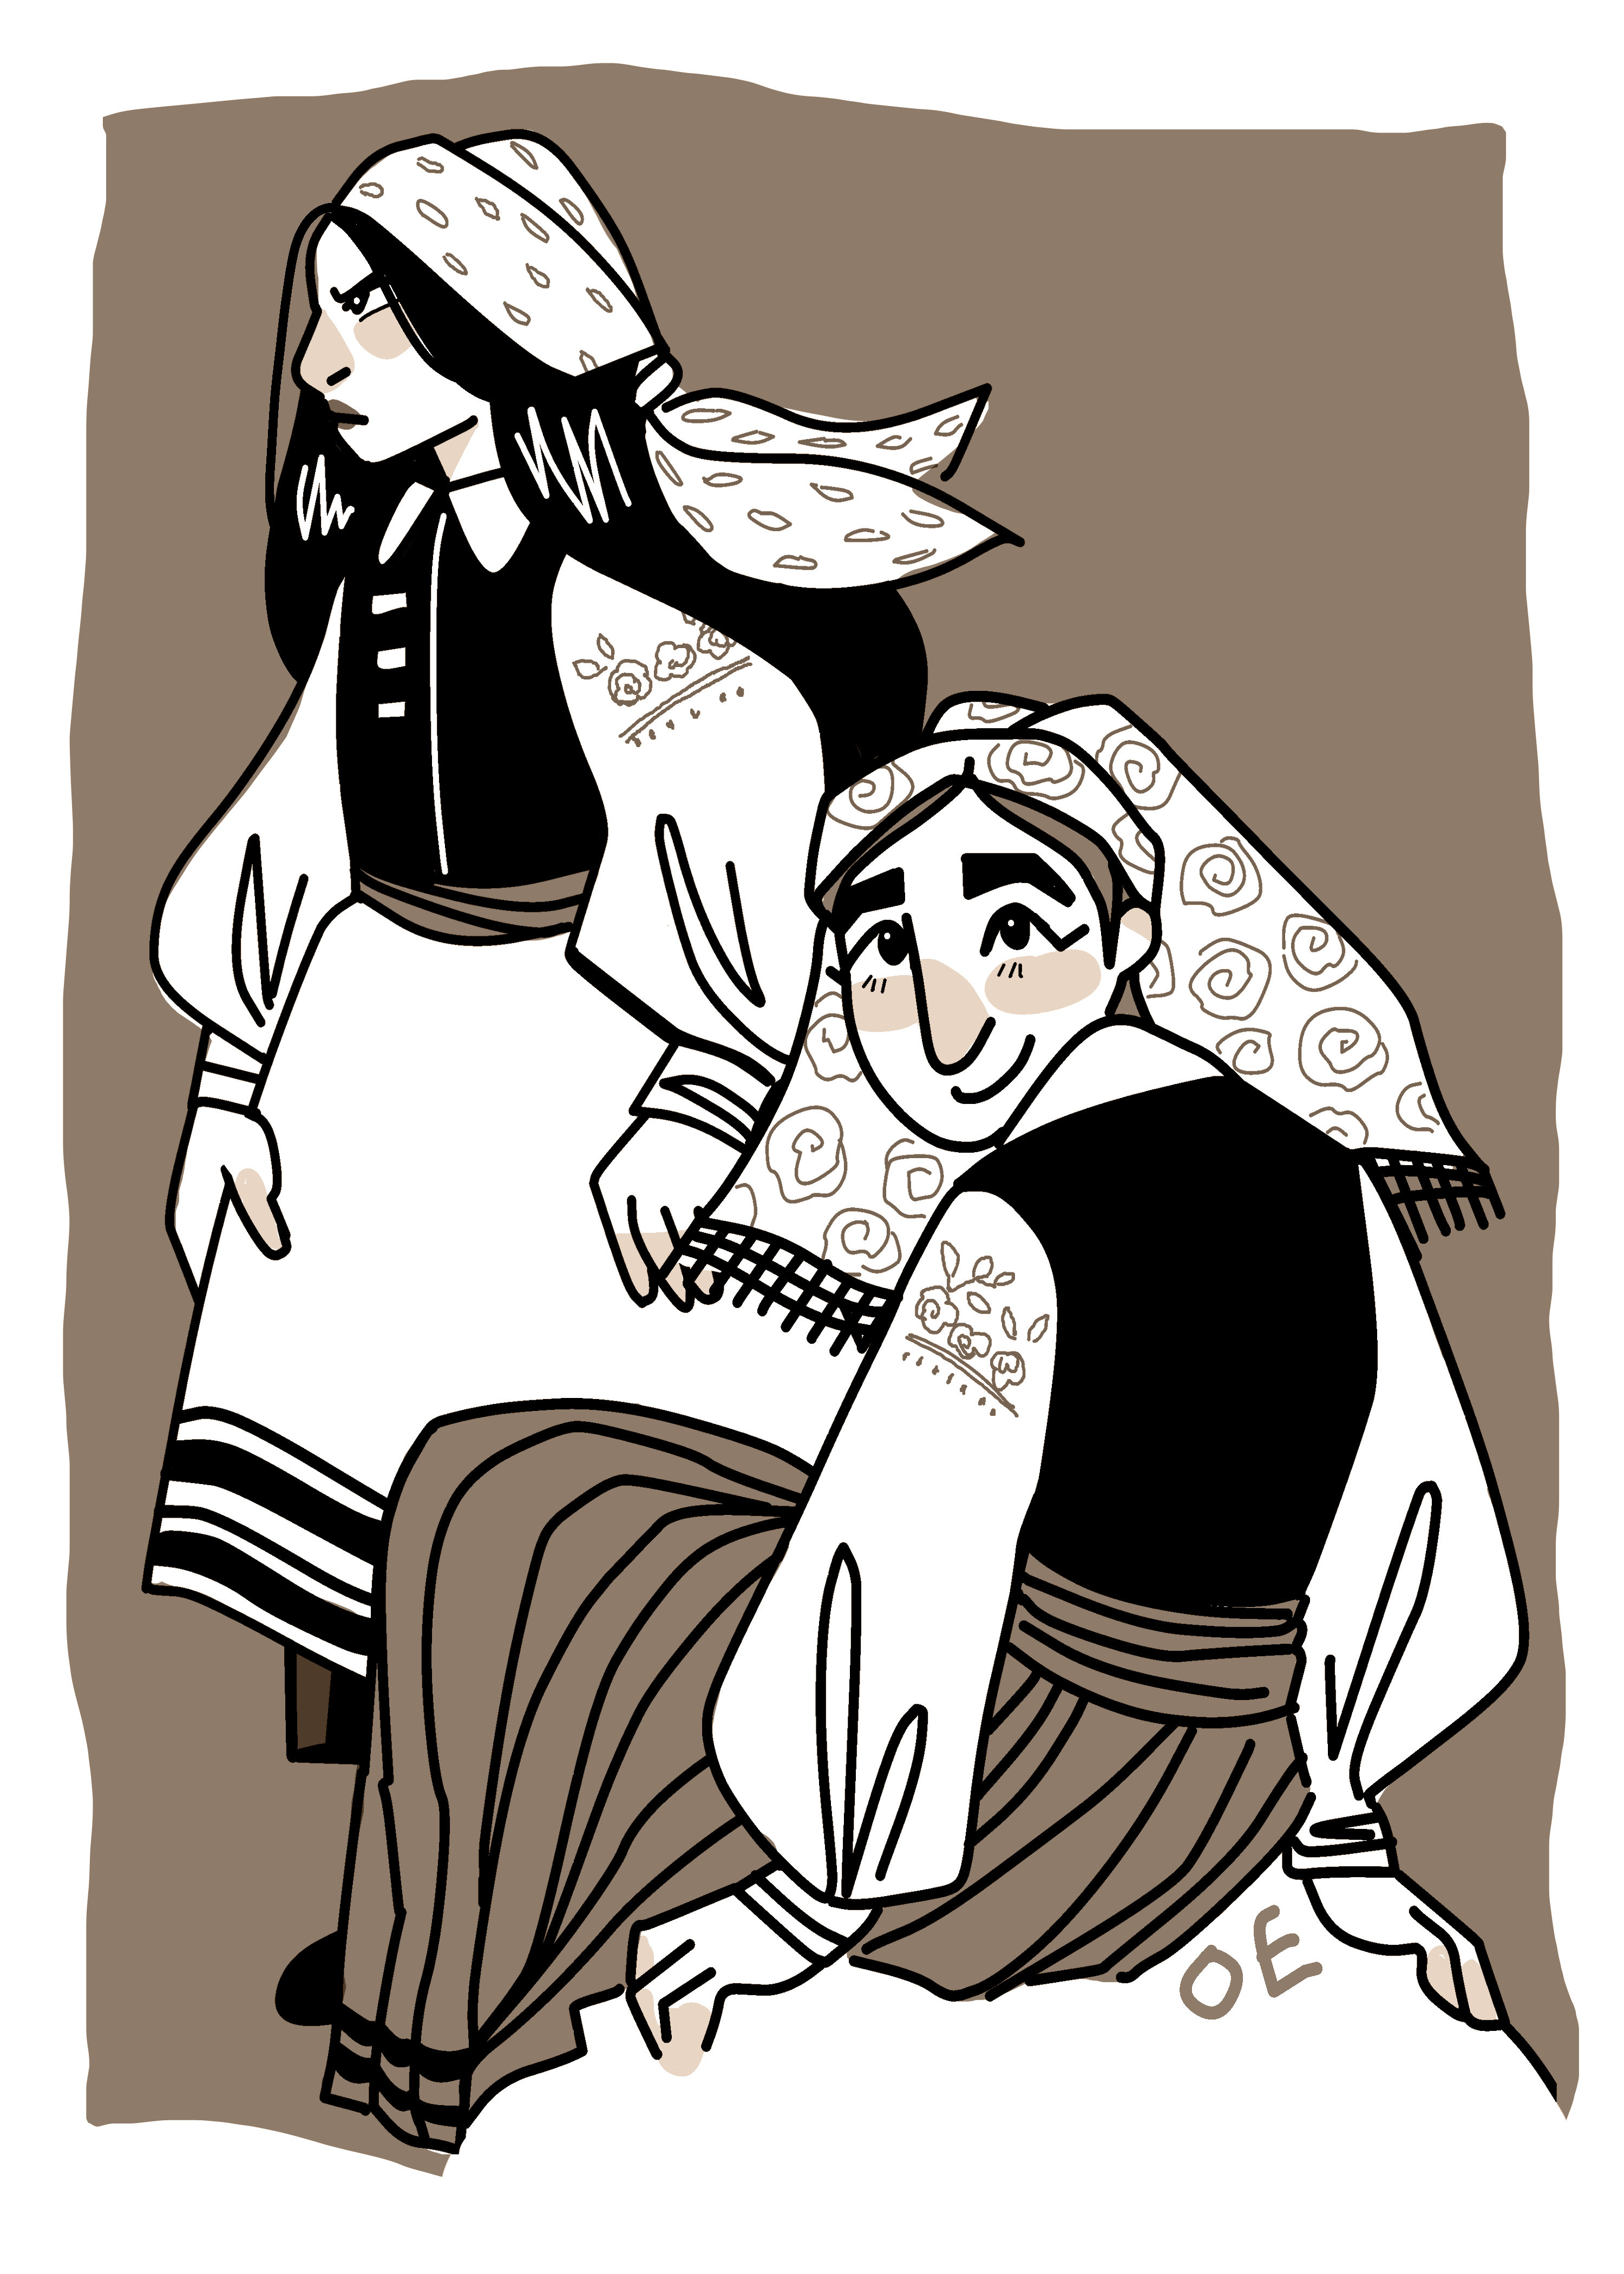 Sepia-toned MS paint illustration of two women in Polish folk costumes, bearing a close resemblance to the protagonist and Eris, respectively